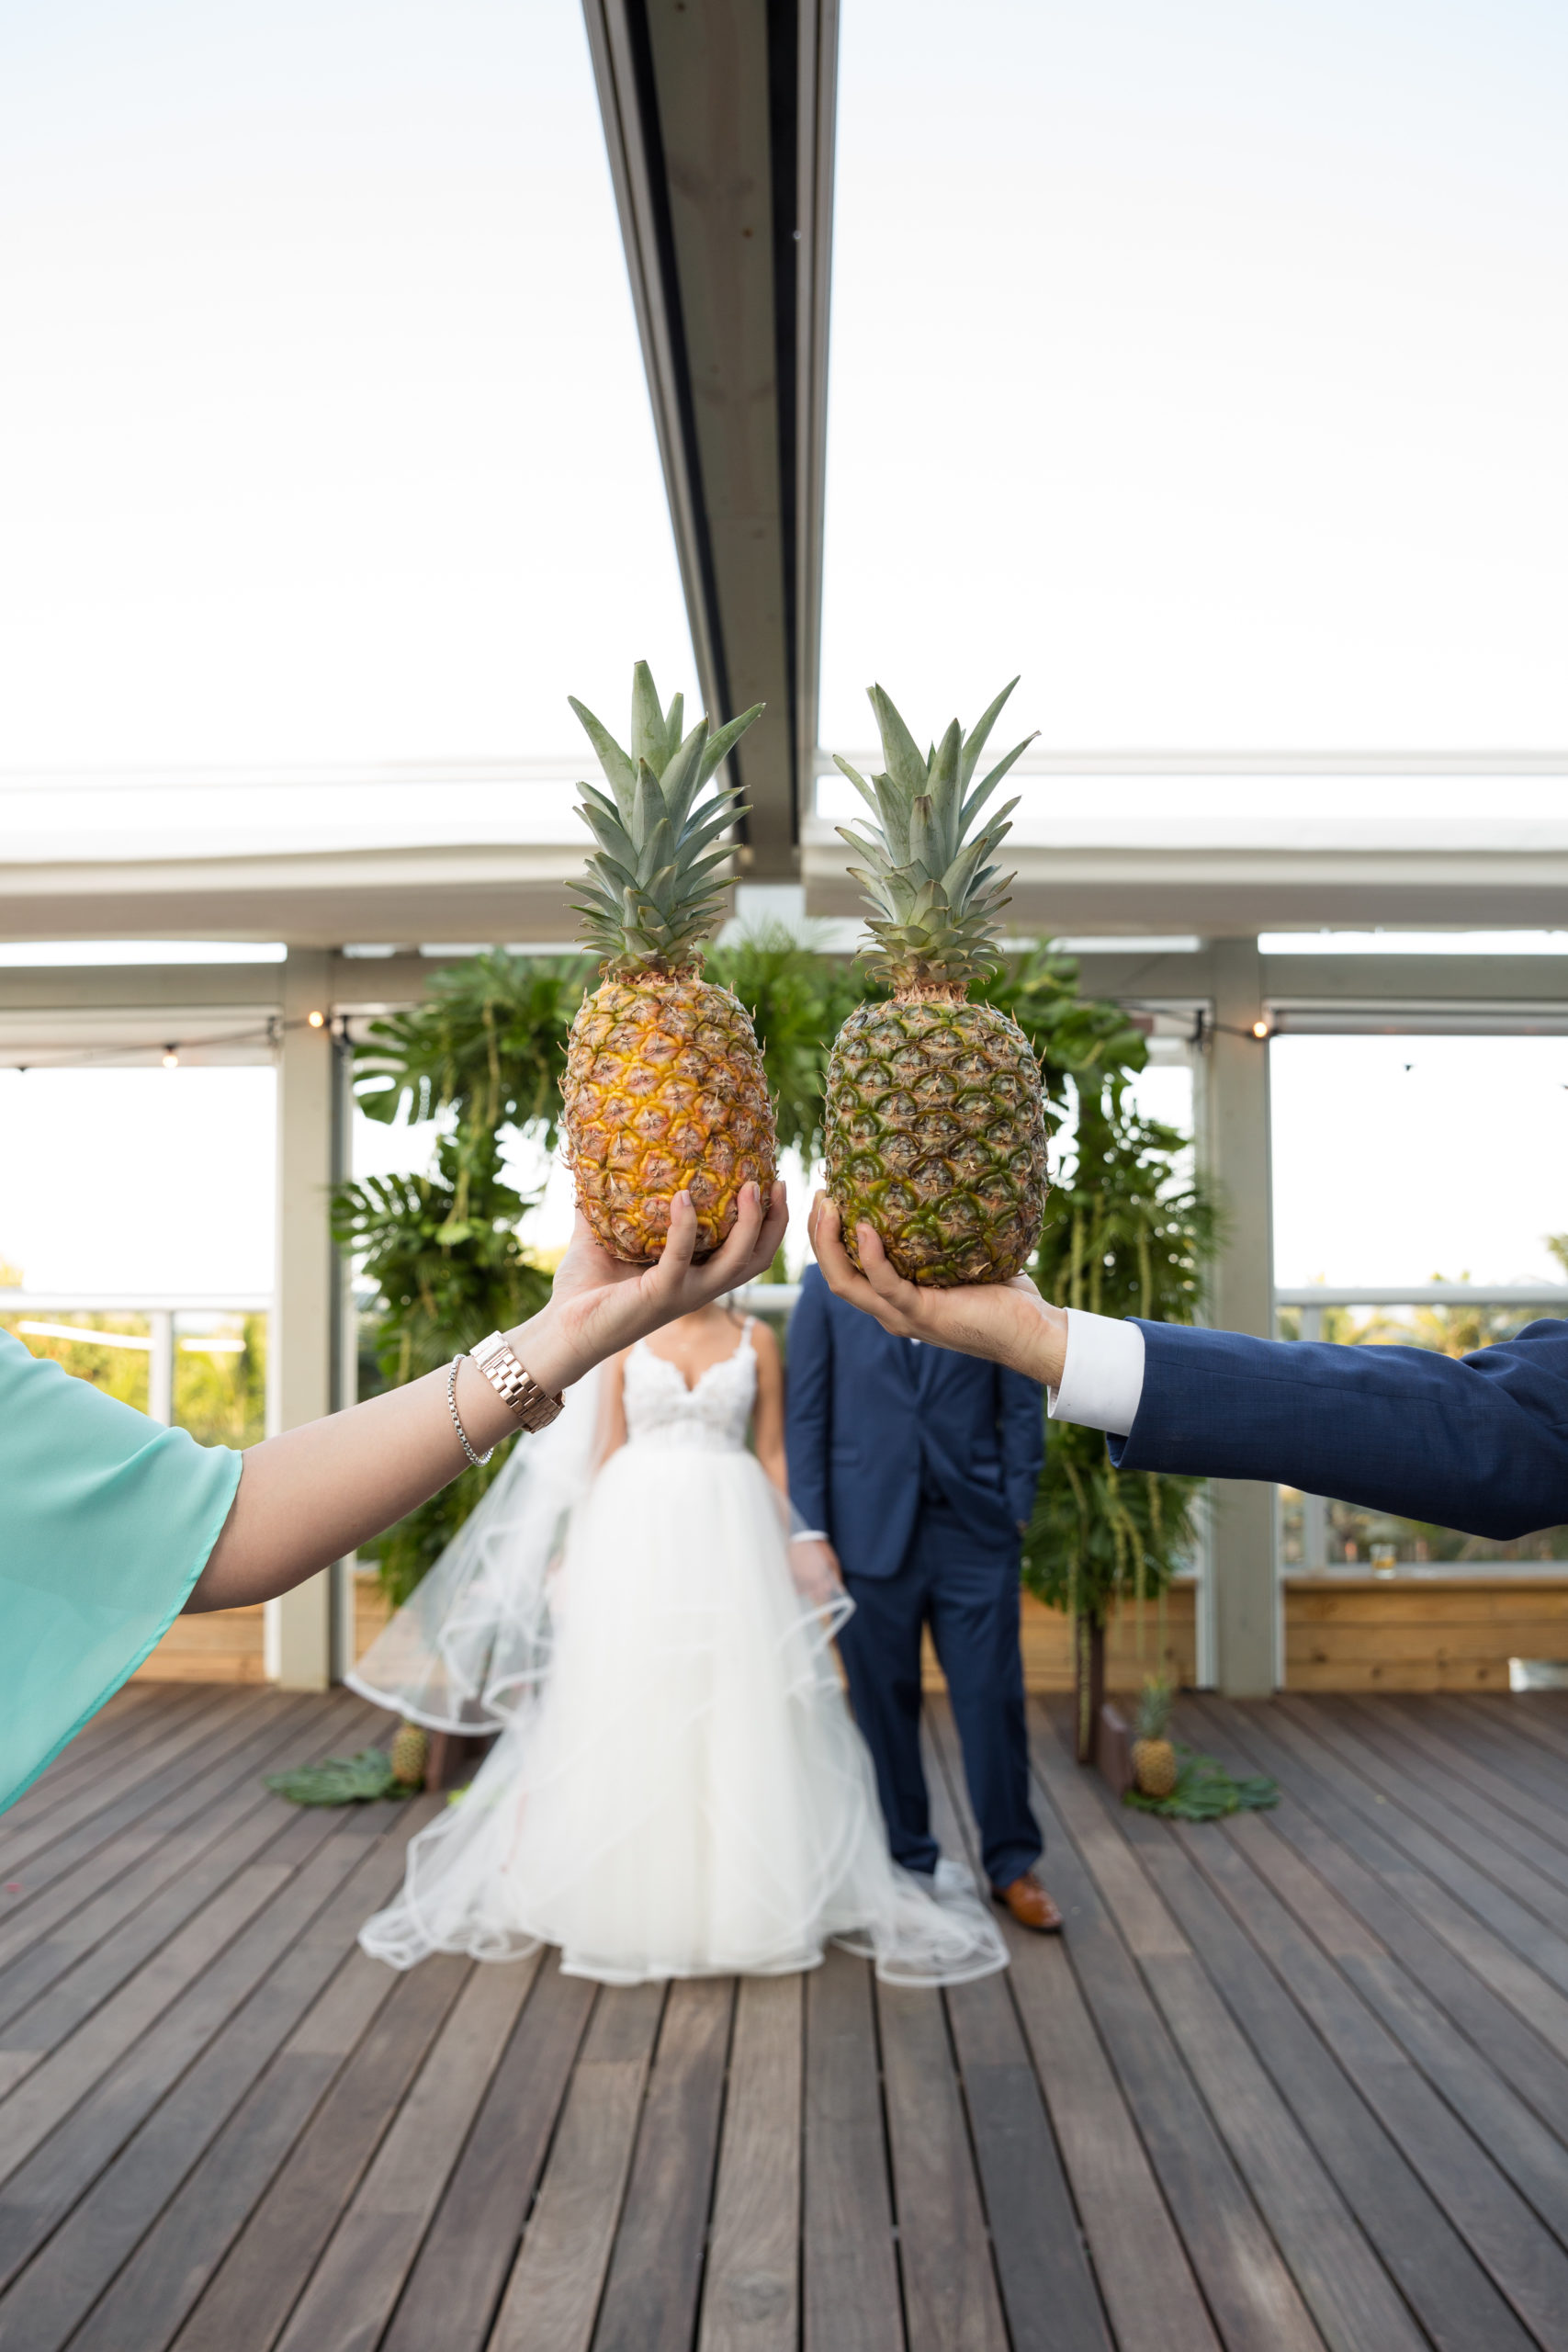 For this pineapple wedding at the Confidante miami beach, the bride and groom's faces are hidden behind the maid of honor and best man holding a pineapple